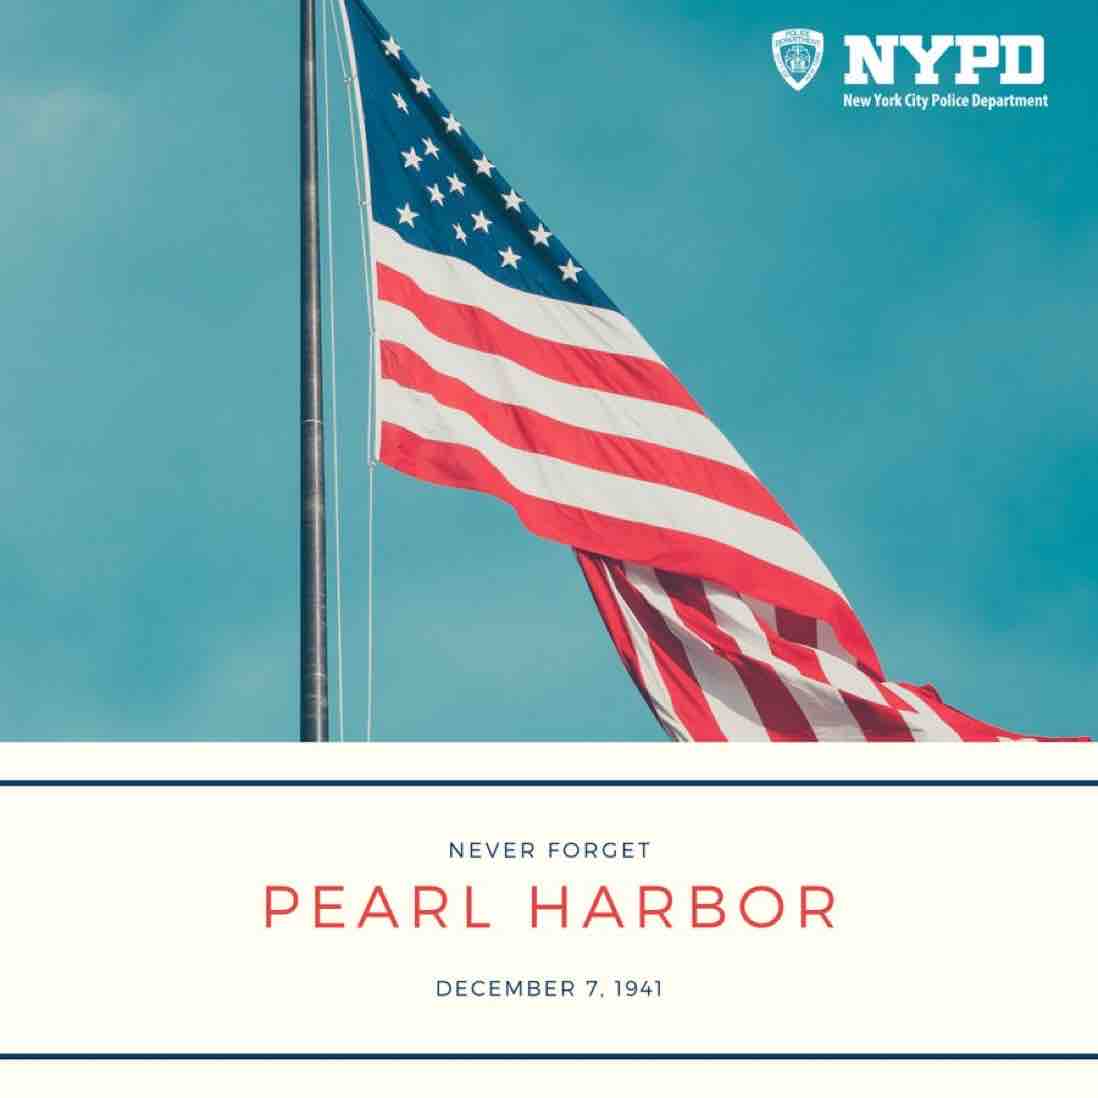 Please join us in taking a moment of silence at 12:55 PM on this 82nd anniversary of the attacks on #PearlHarbor in honor of the 2,403 lives lost serving our country. We vow to #NeverForget their legacy and their sacrifice.